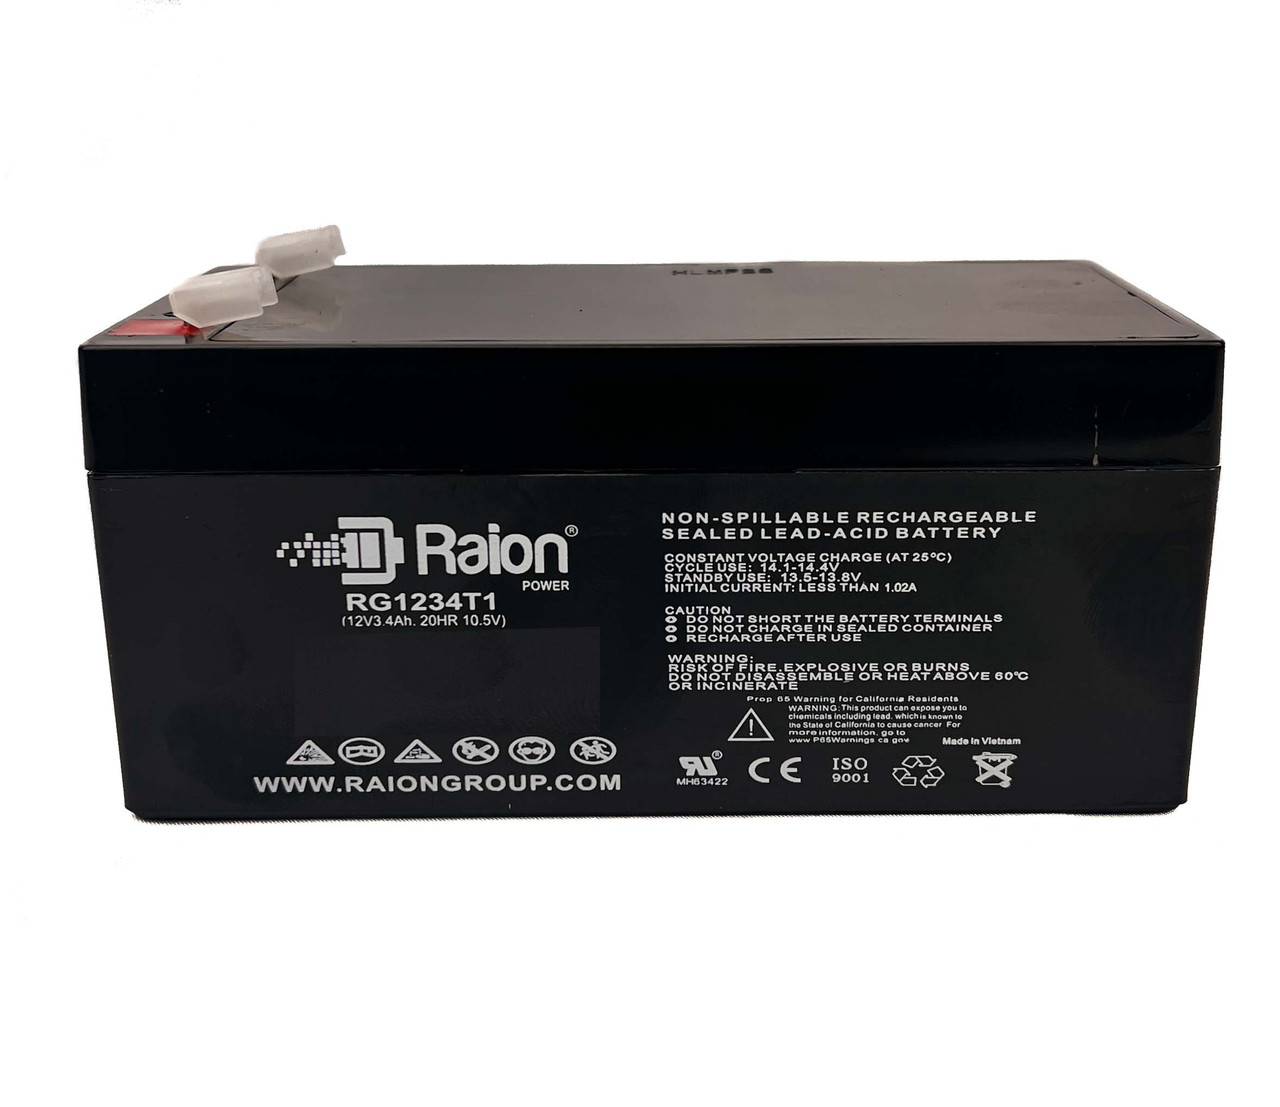 Raion Power RG1234T1 Rechargeable Compatible Rechargeable Battery for Optronics Nightblaster